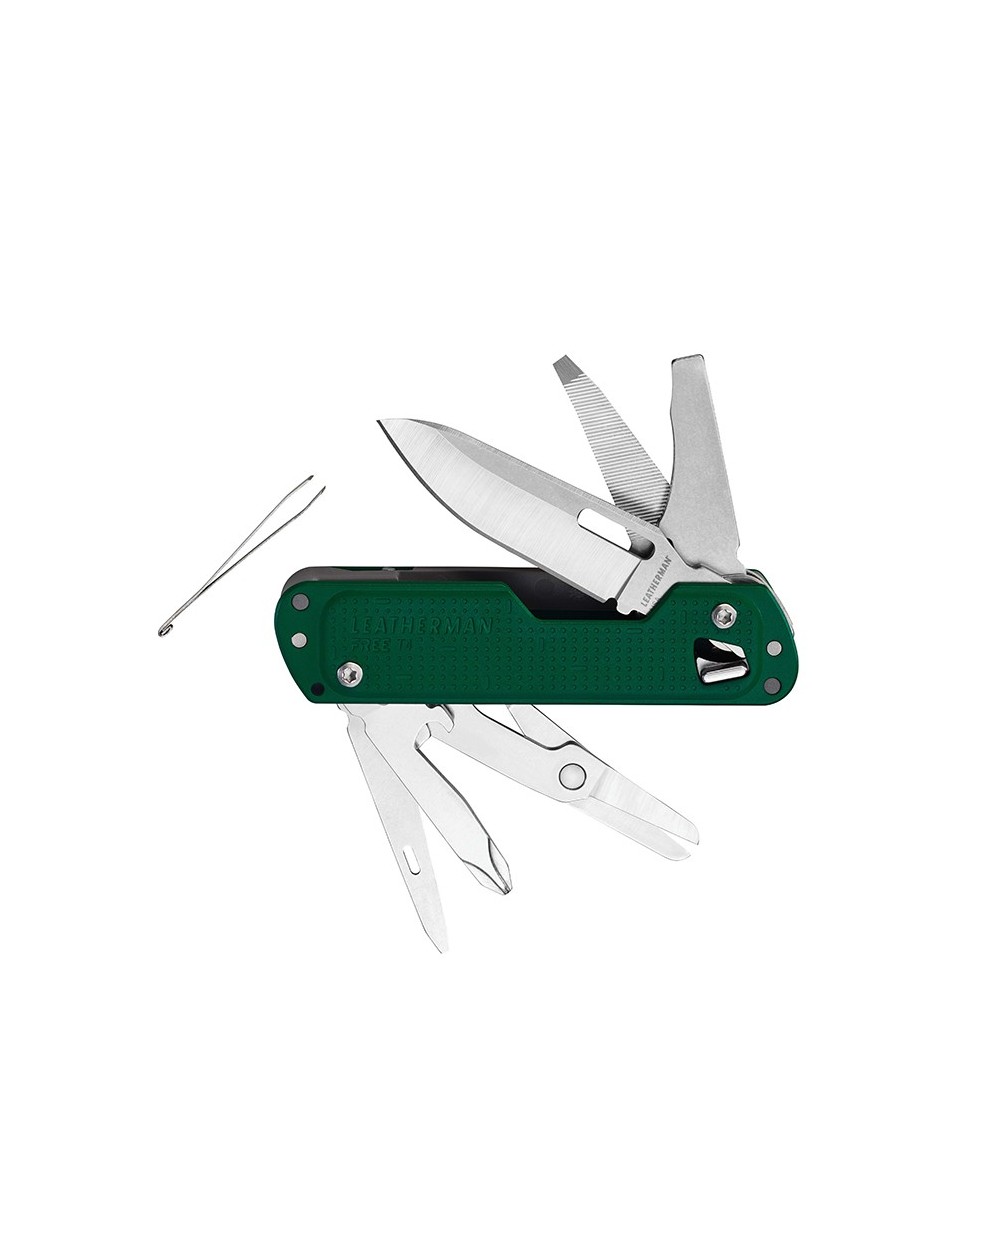 leatherman-pince-multifonctions-free-t4-vert-832875-1